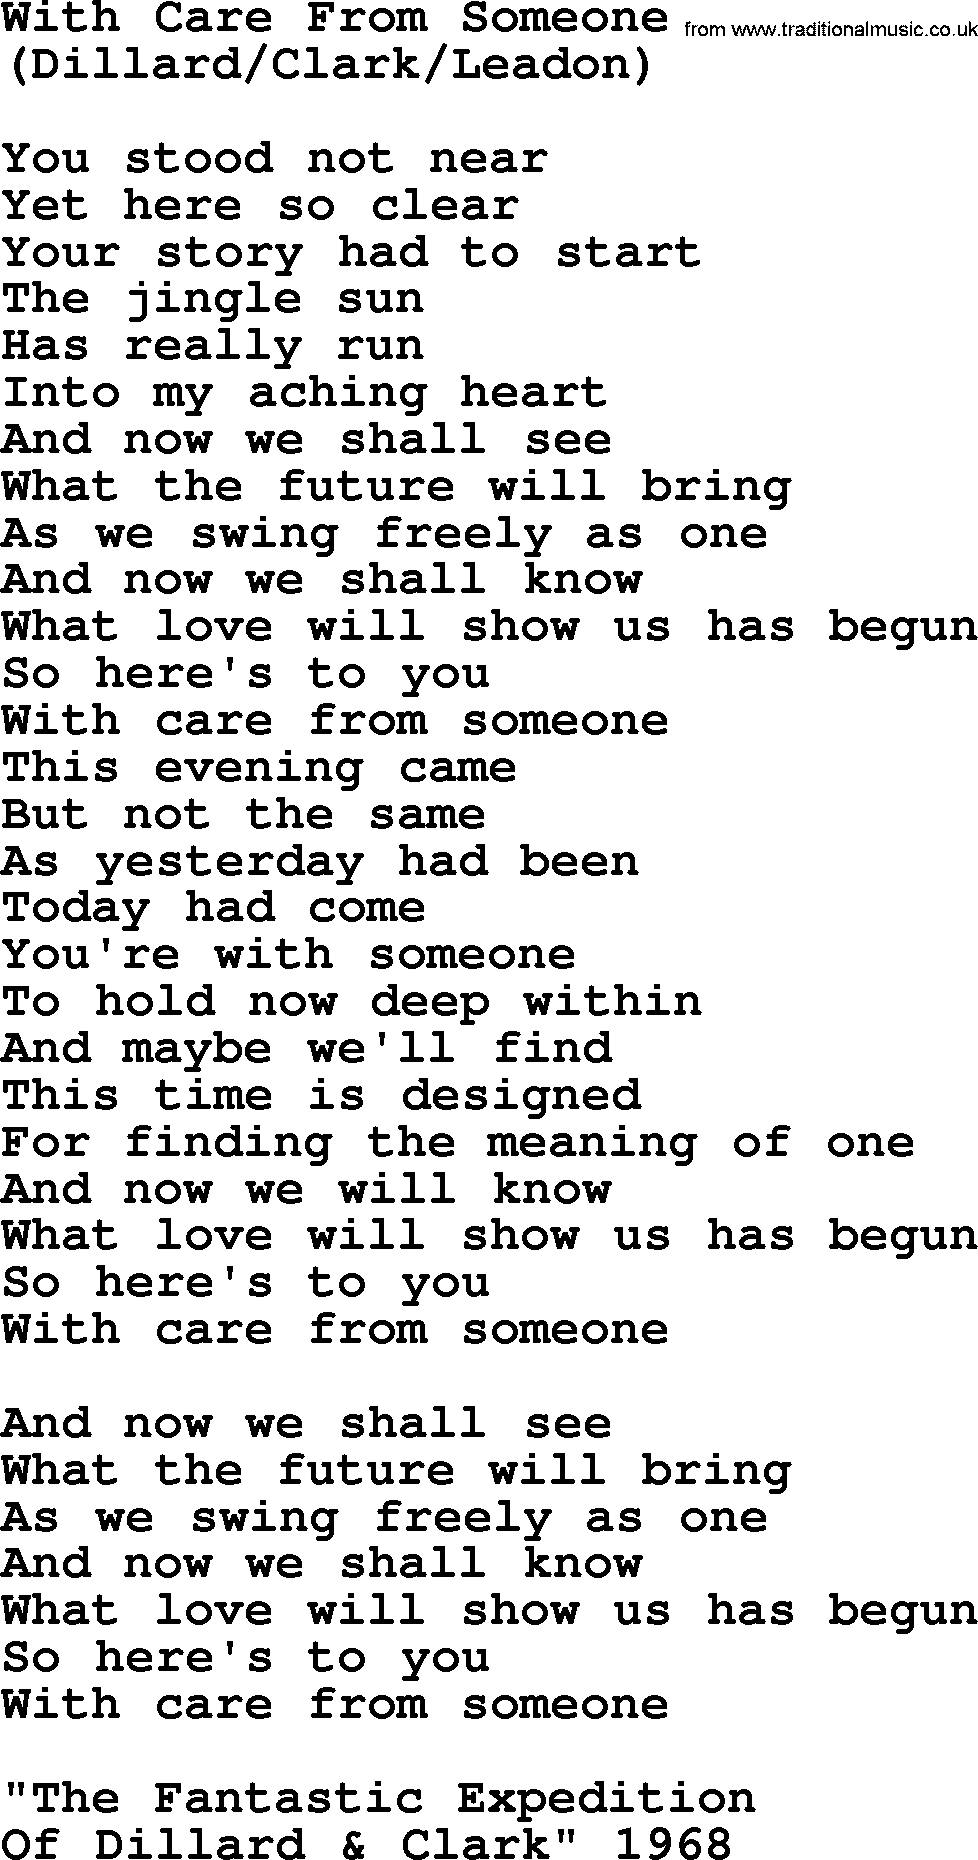 The Byrds song With Care From Someone, lyrics